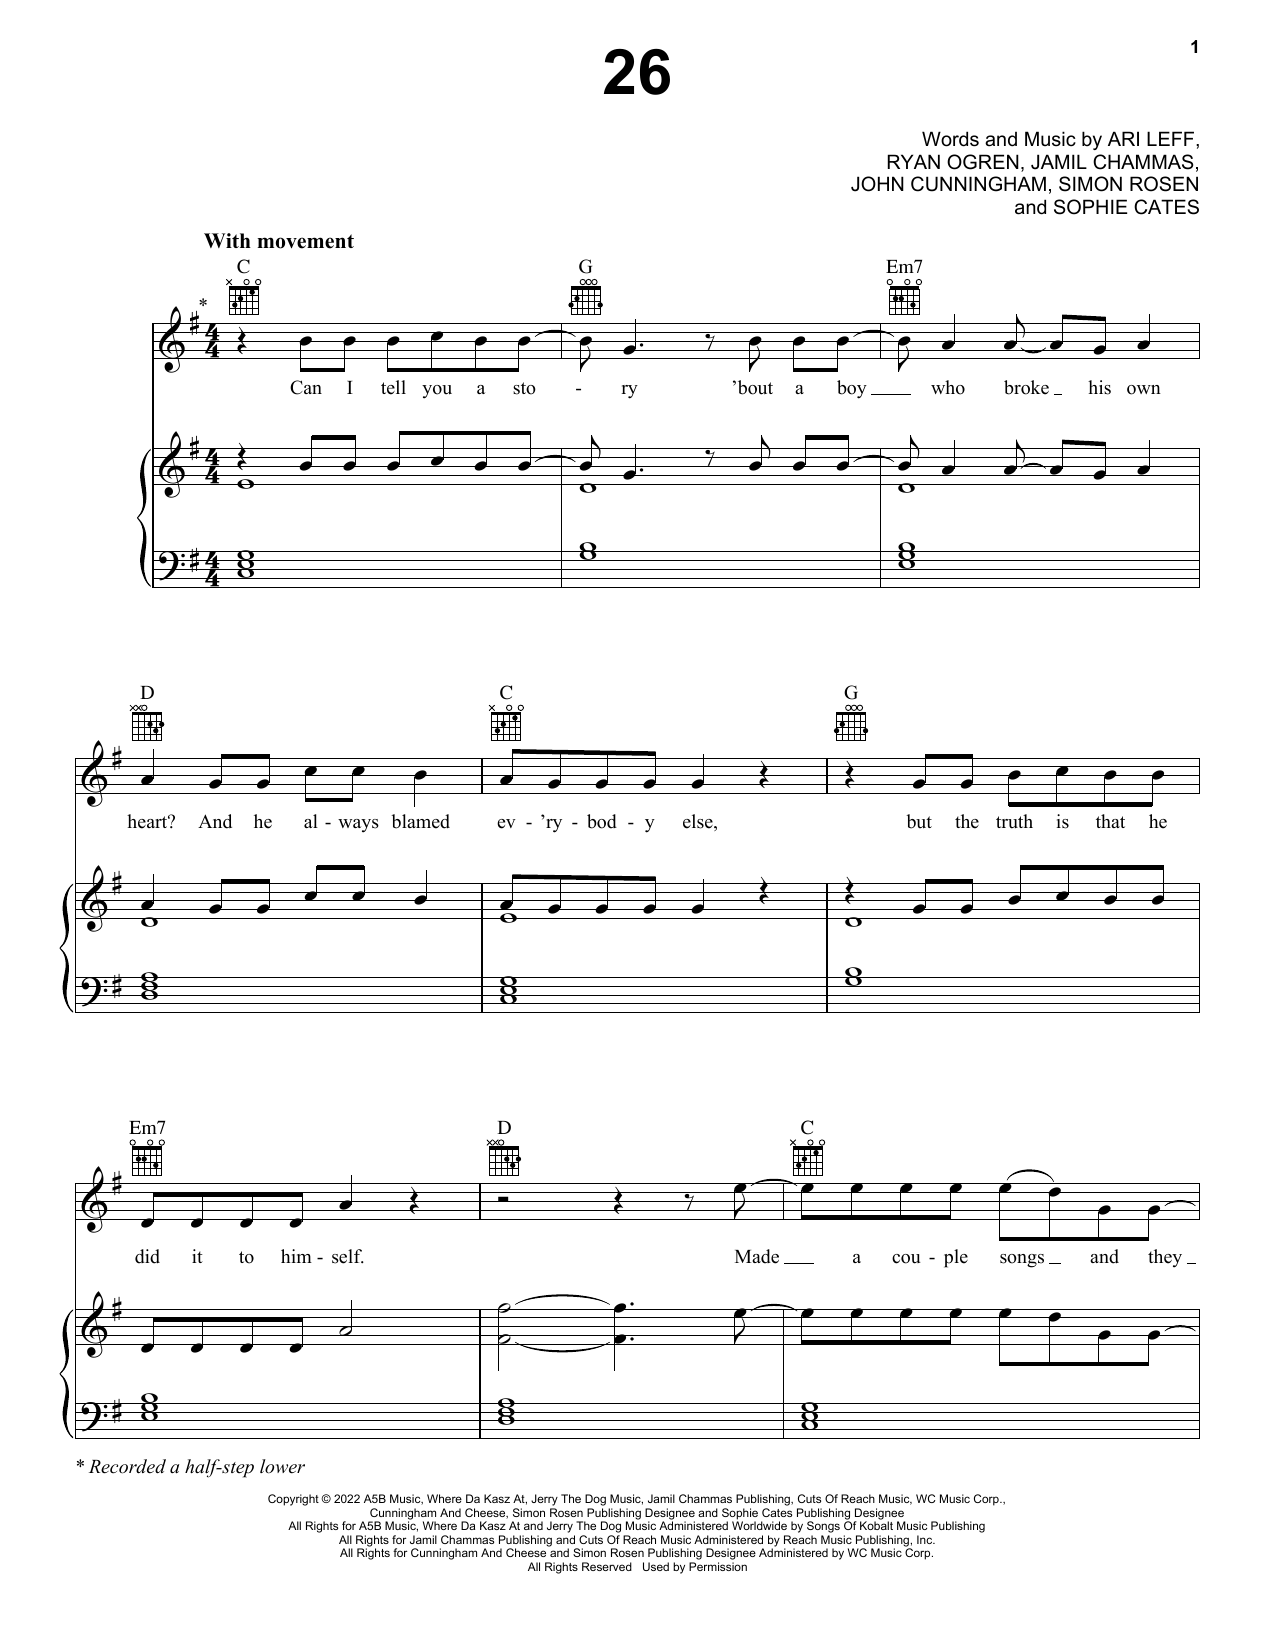 Lauv 26 sheet music notes and chords. Download Printable PDF.